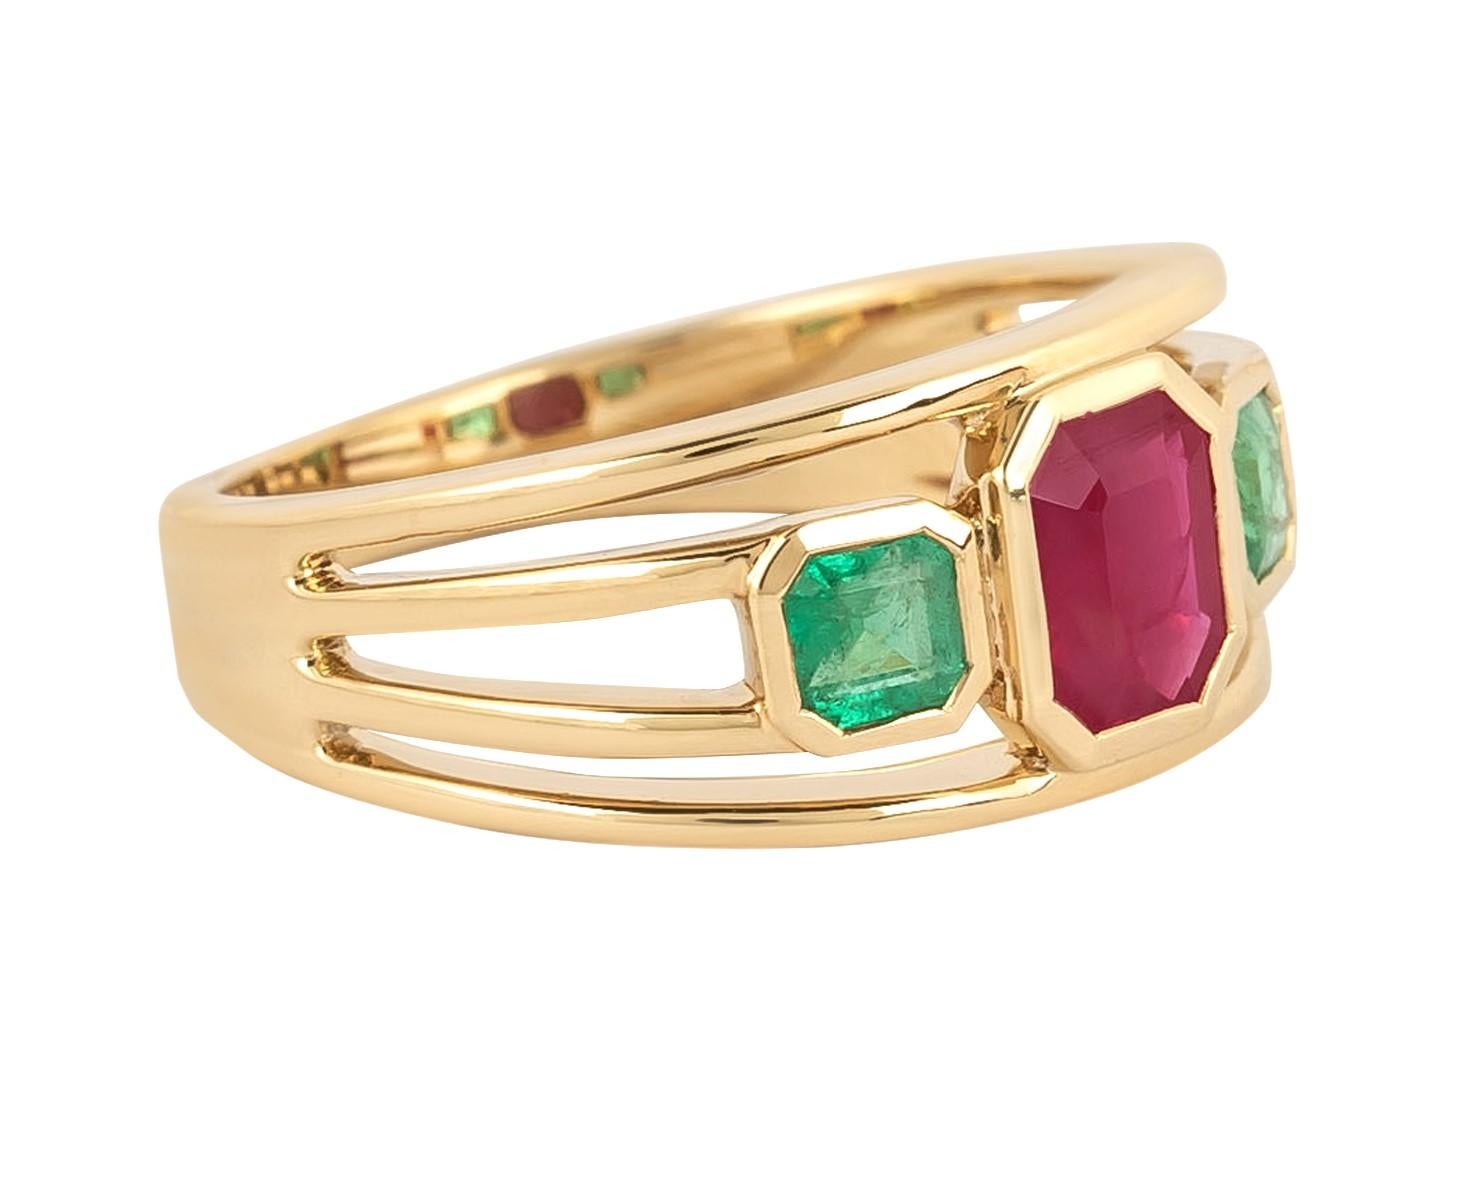 Crafted with an exceptional eye for detail, the 18 Karat Gold 1.51 Carat Emerald and Ruby 